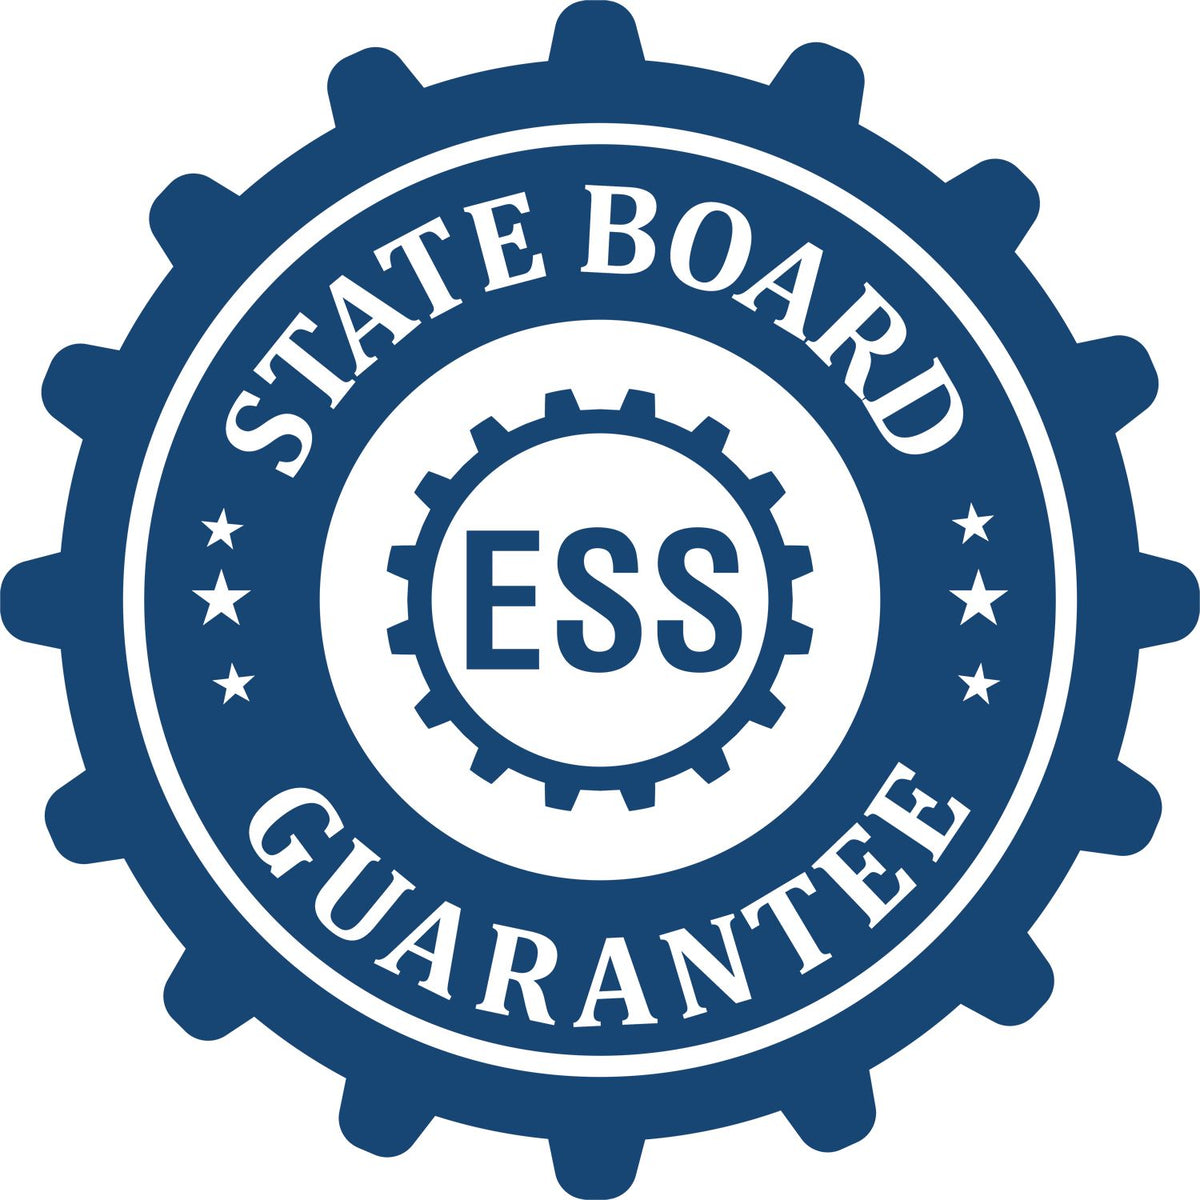 An emblem in a gear shape illustrating a state board guarantee for the Hybrid Nevada Geologist Seal